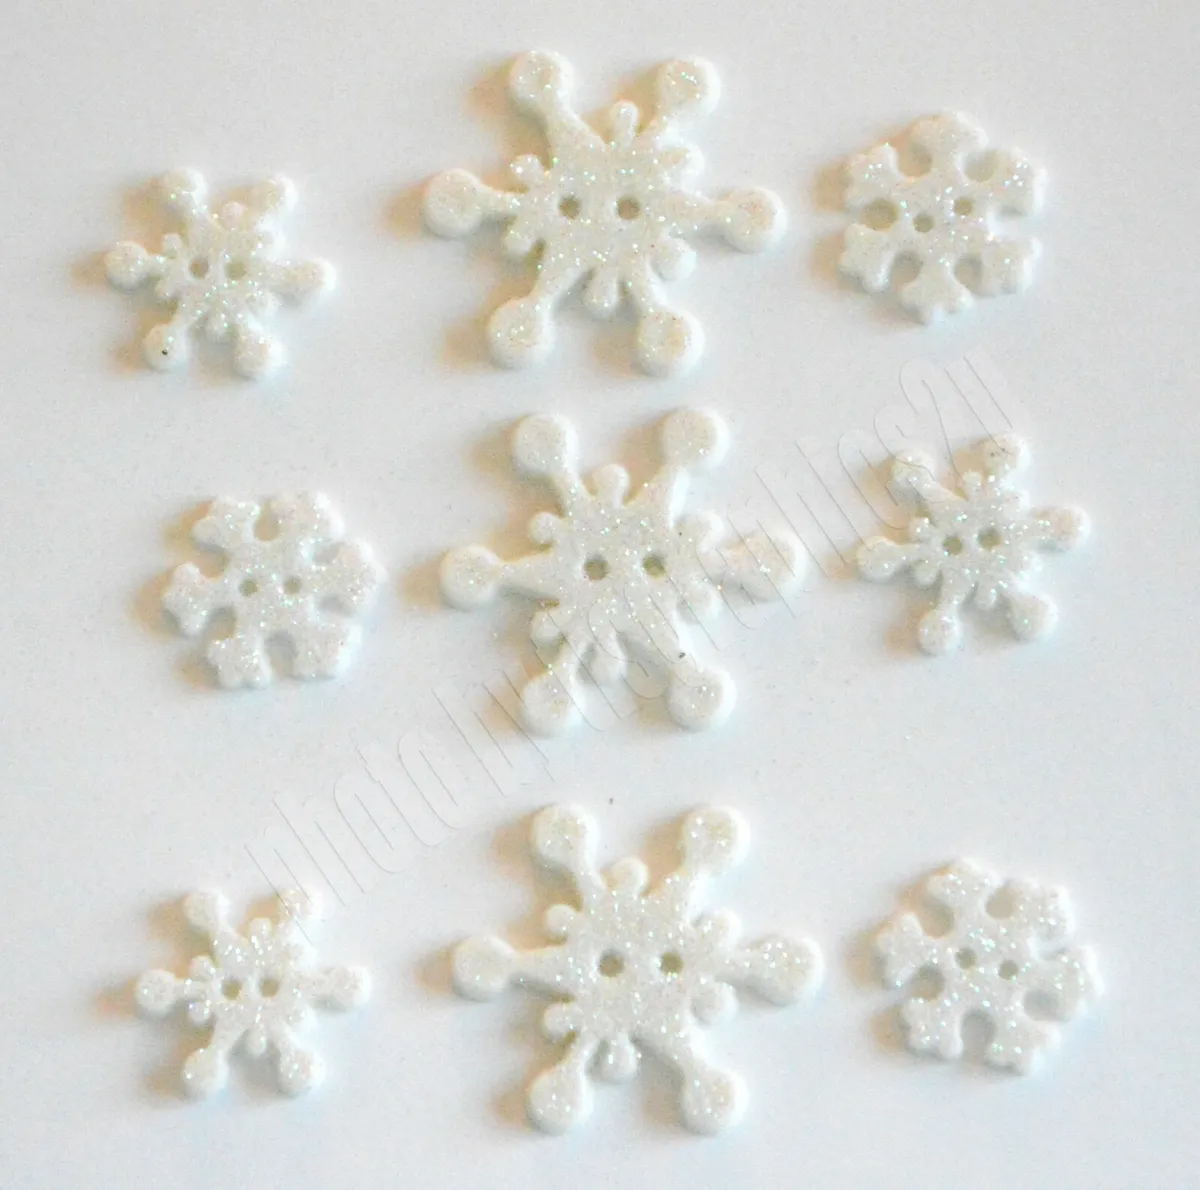 Frosty Flakes / Glitter Snowflake Sew-Thru Buttons / Buttons Galore  Christmas